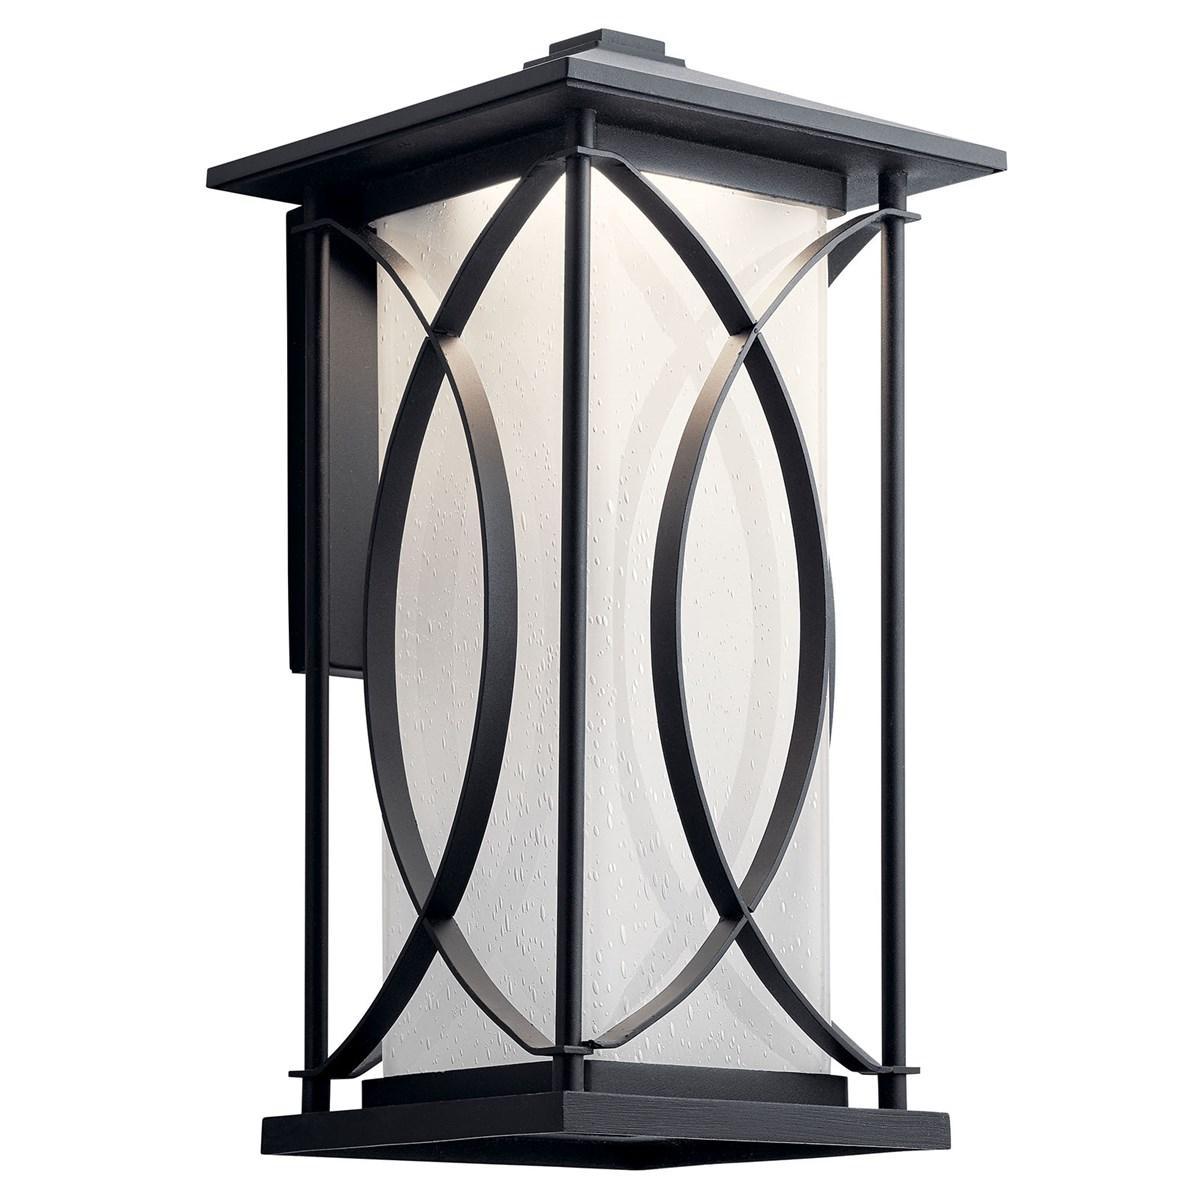 Ashbern 18 in. LED Outdoor Wall Sconce 625 Lumens 3000K Black Finish